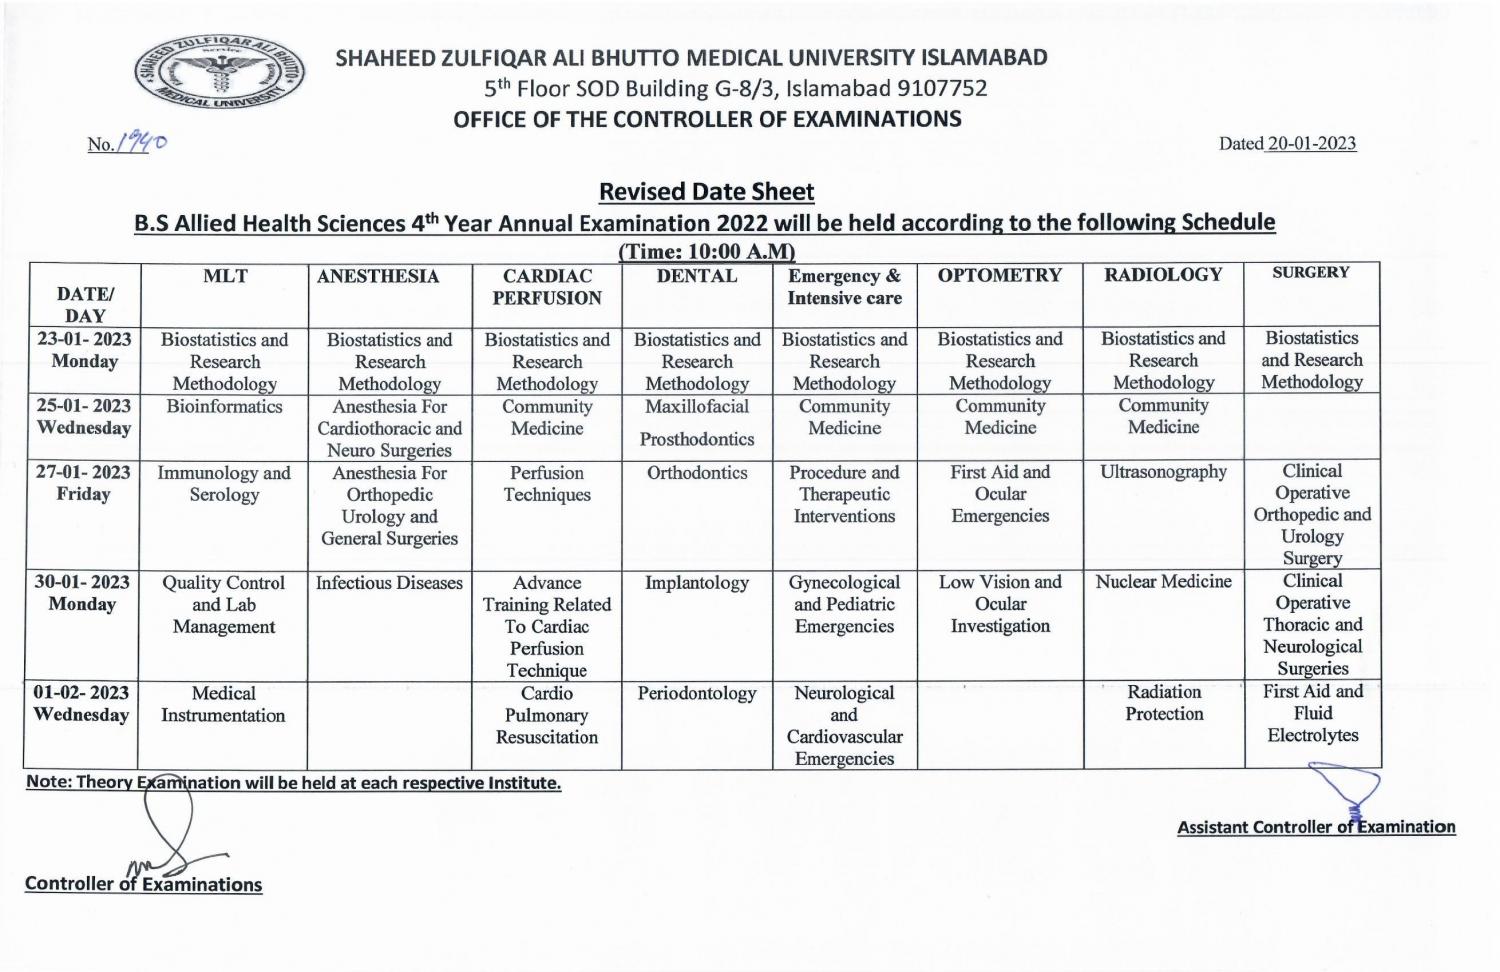 Revised - B.S Allied Health Sciences 4th Year Annual Examination 2022